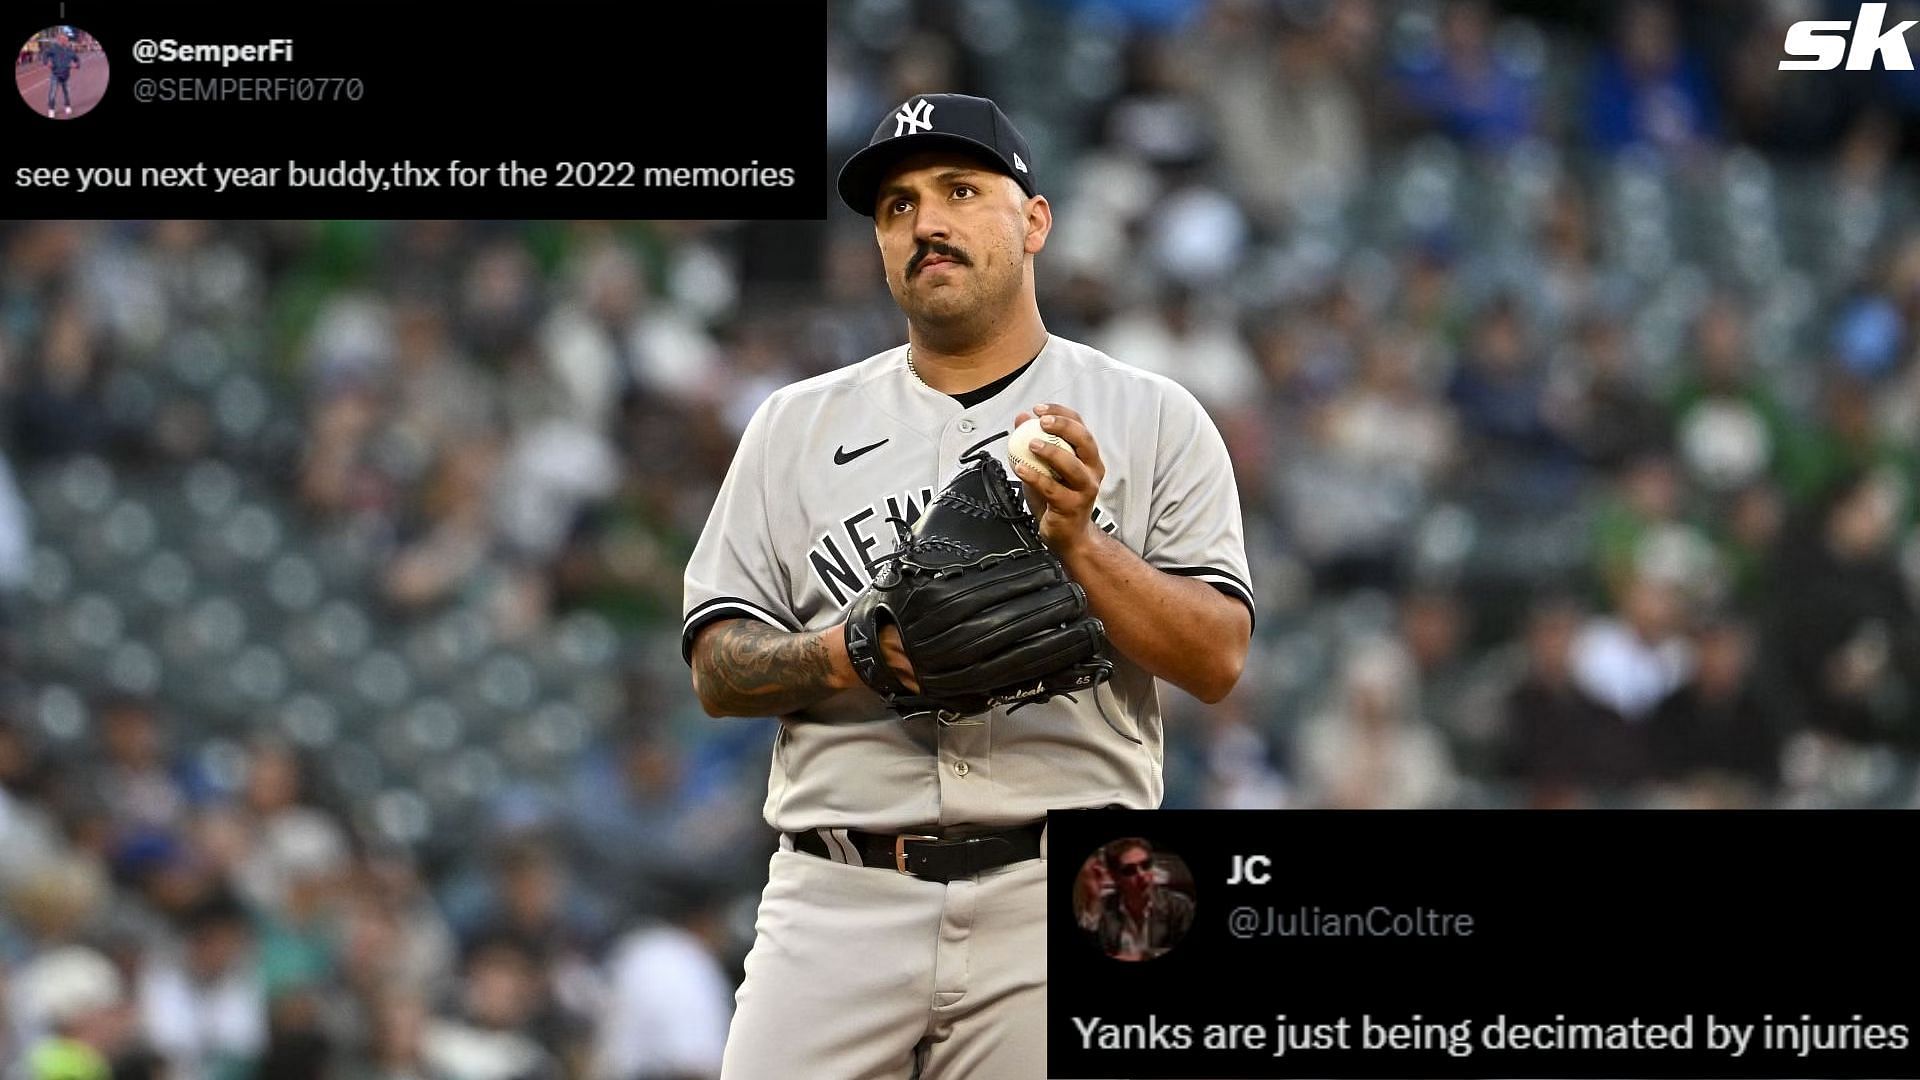 New York Yankees fans devastated by news Nestor Cortes will likely